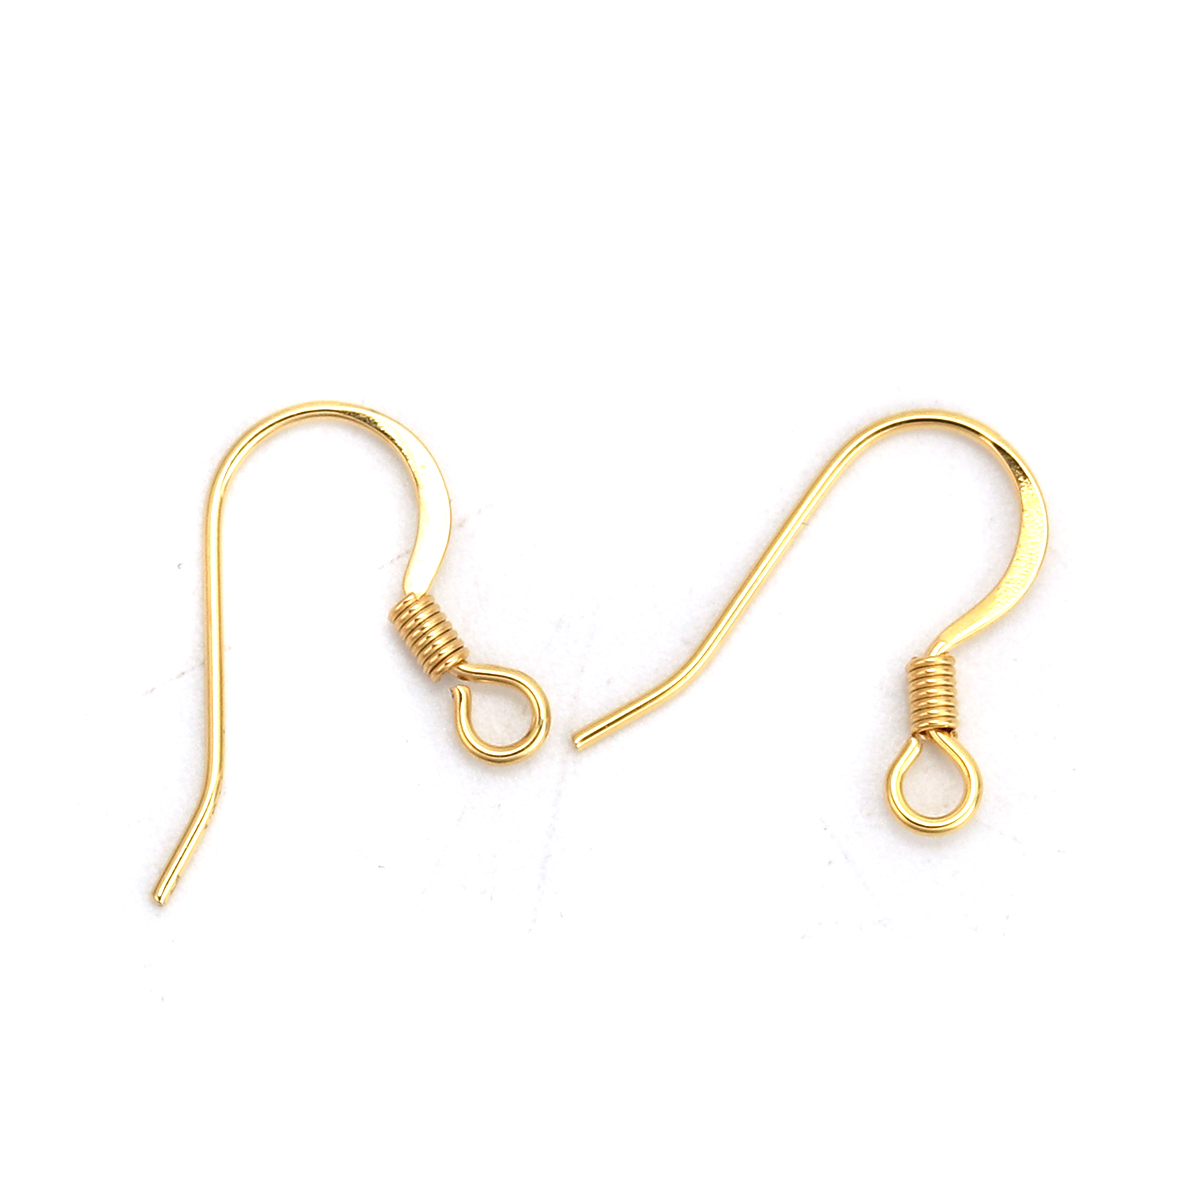 Picture of 316 Stainless Steel Ear Wire Hooks Earring Findings Gold Plated W/ Loop 15mm( 5/8") x 13mm( 4/8"), Post/ Wire Size: (21 gauge), 6 PCs